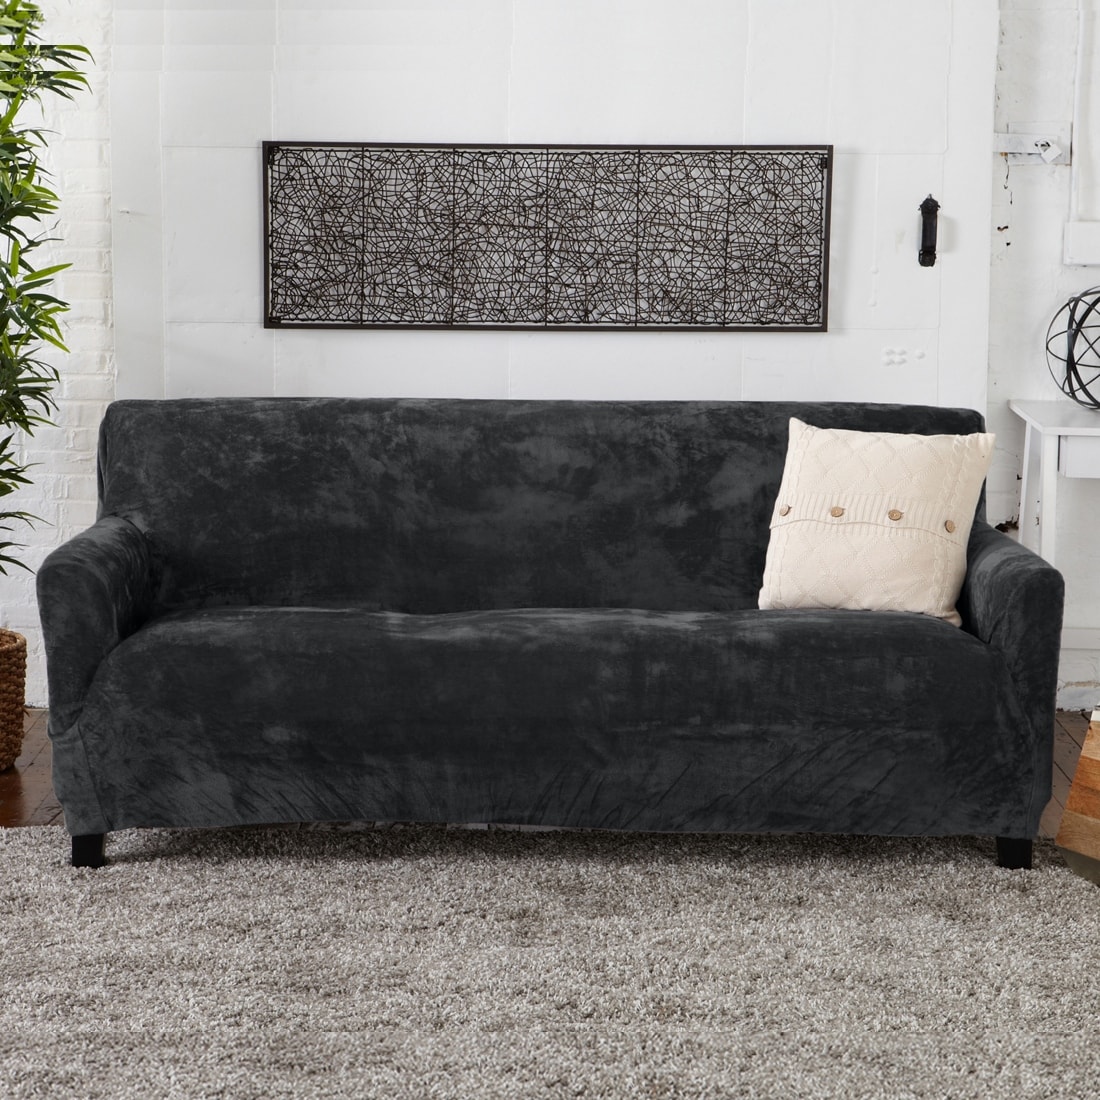 3 Seater Stretch Form Fit Elastic Furniture Sofa Couch Cover Slipcover Black 